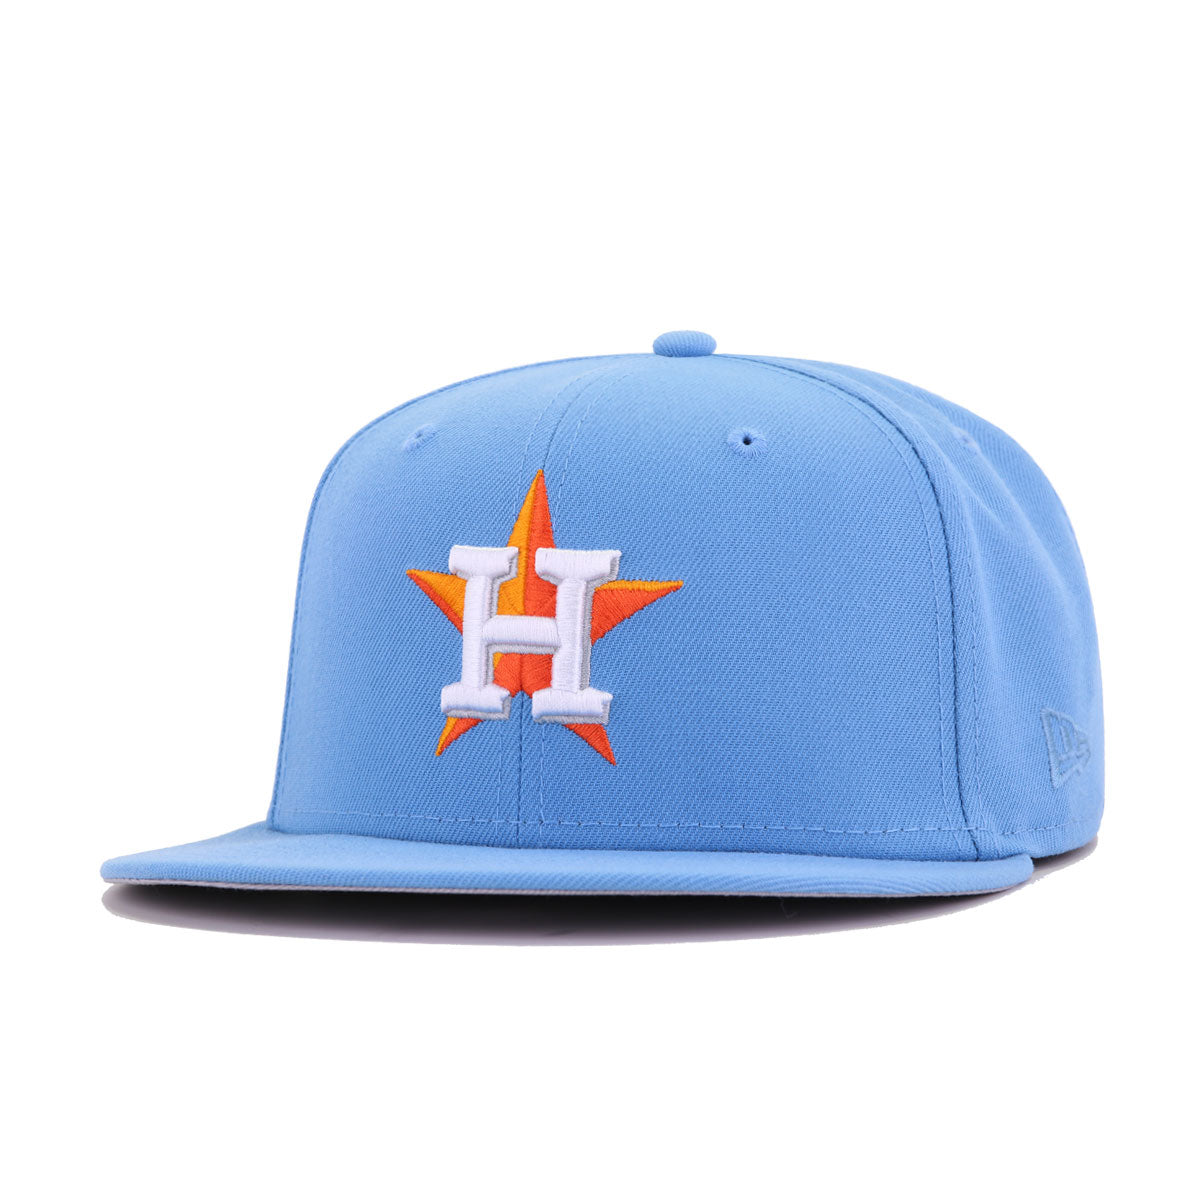 New Era 59FIFTY Houston Astros Road Authentic Collection on Field Fitted Hat Navy Orange